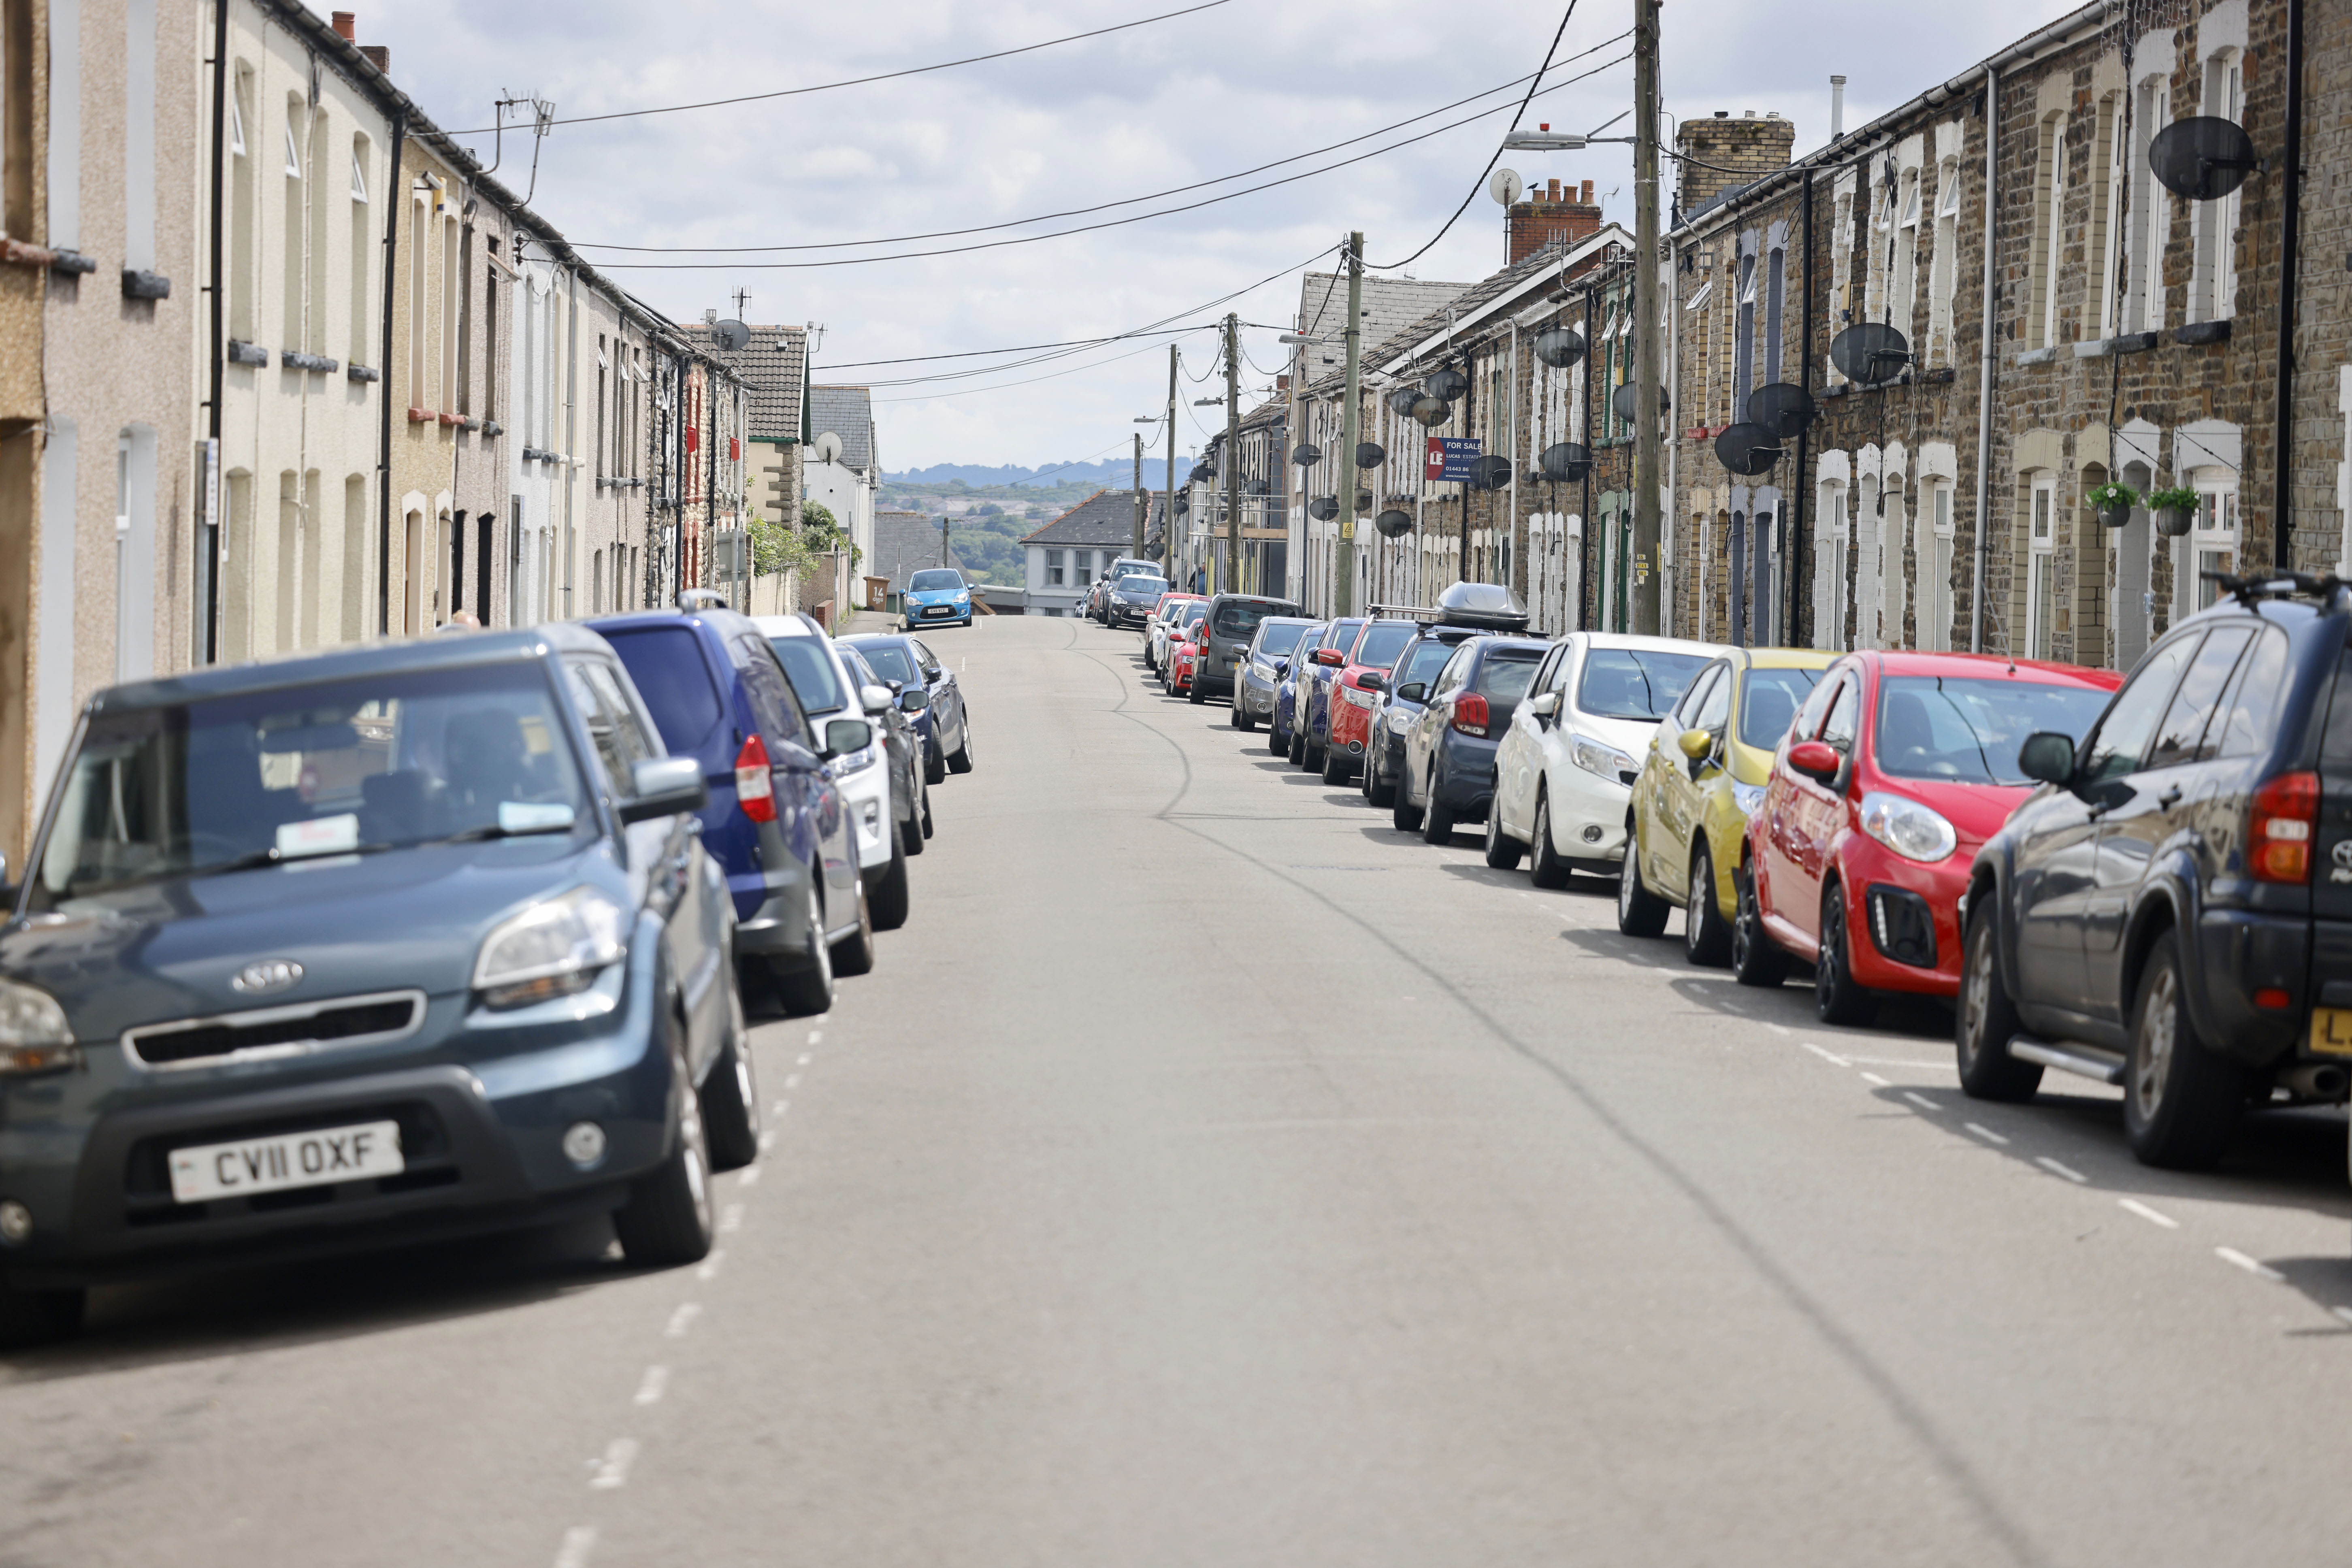 Residents in Bargoed, Wales, are fuming after being fined for parking outside their own homes